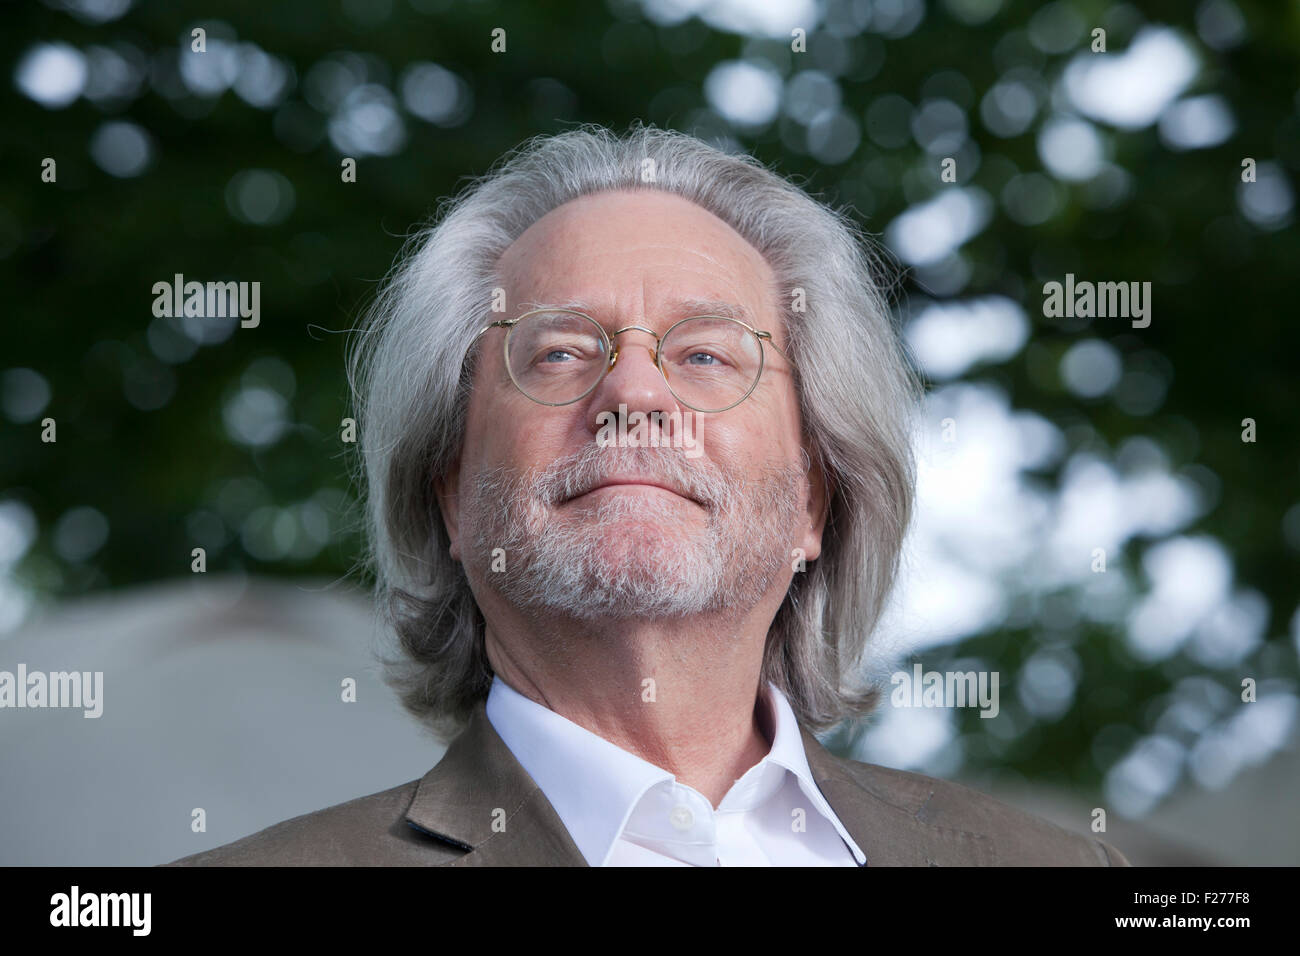 <b>Anthony Clifford</b> &quot;A. C.&quot; Grayling, the British philosopher and author, ... - anthony-clifford-a-c-grayling-the-british-philosopher-and-author-at-F277F8